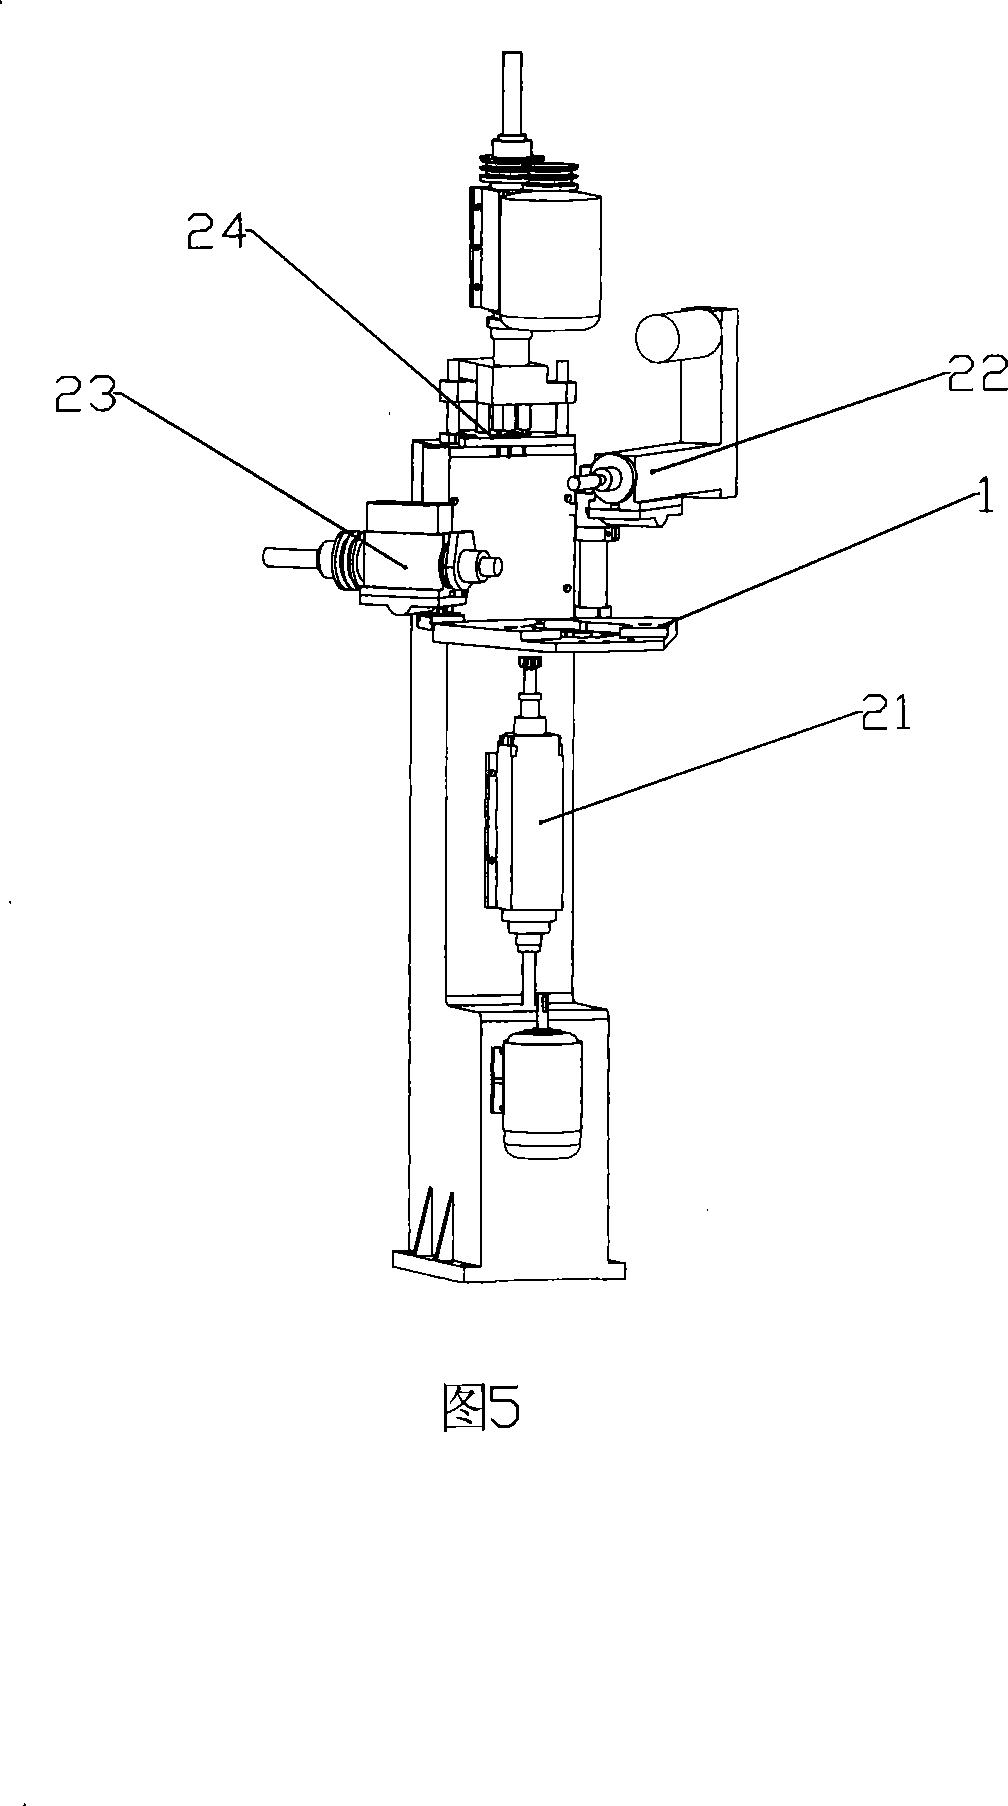 Multi-station combined machine tool